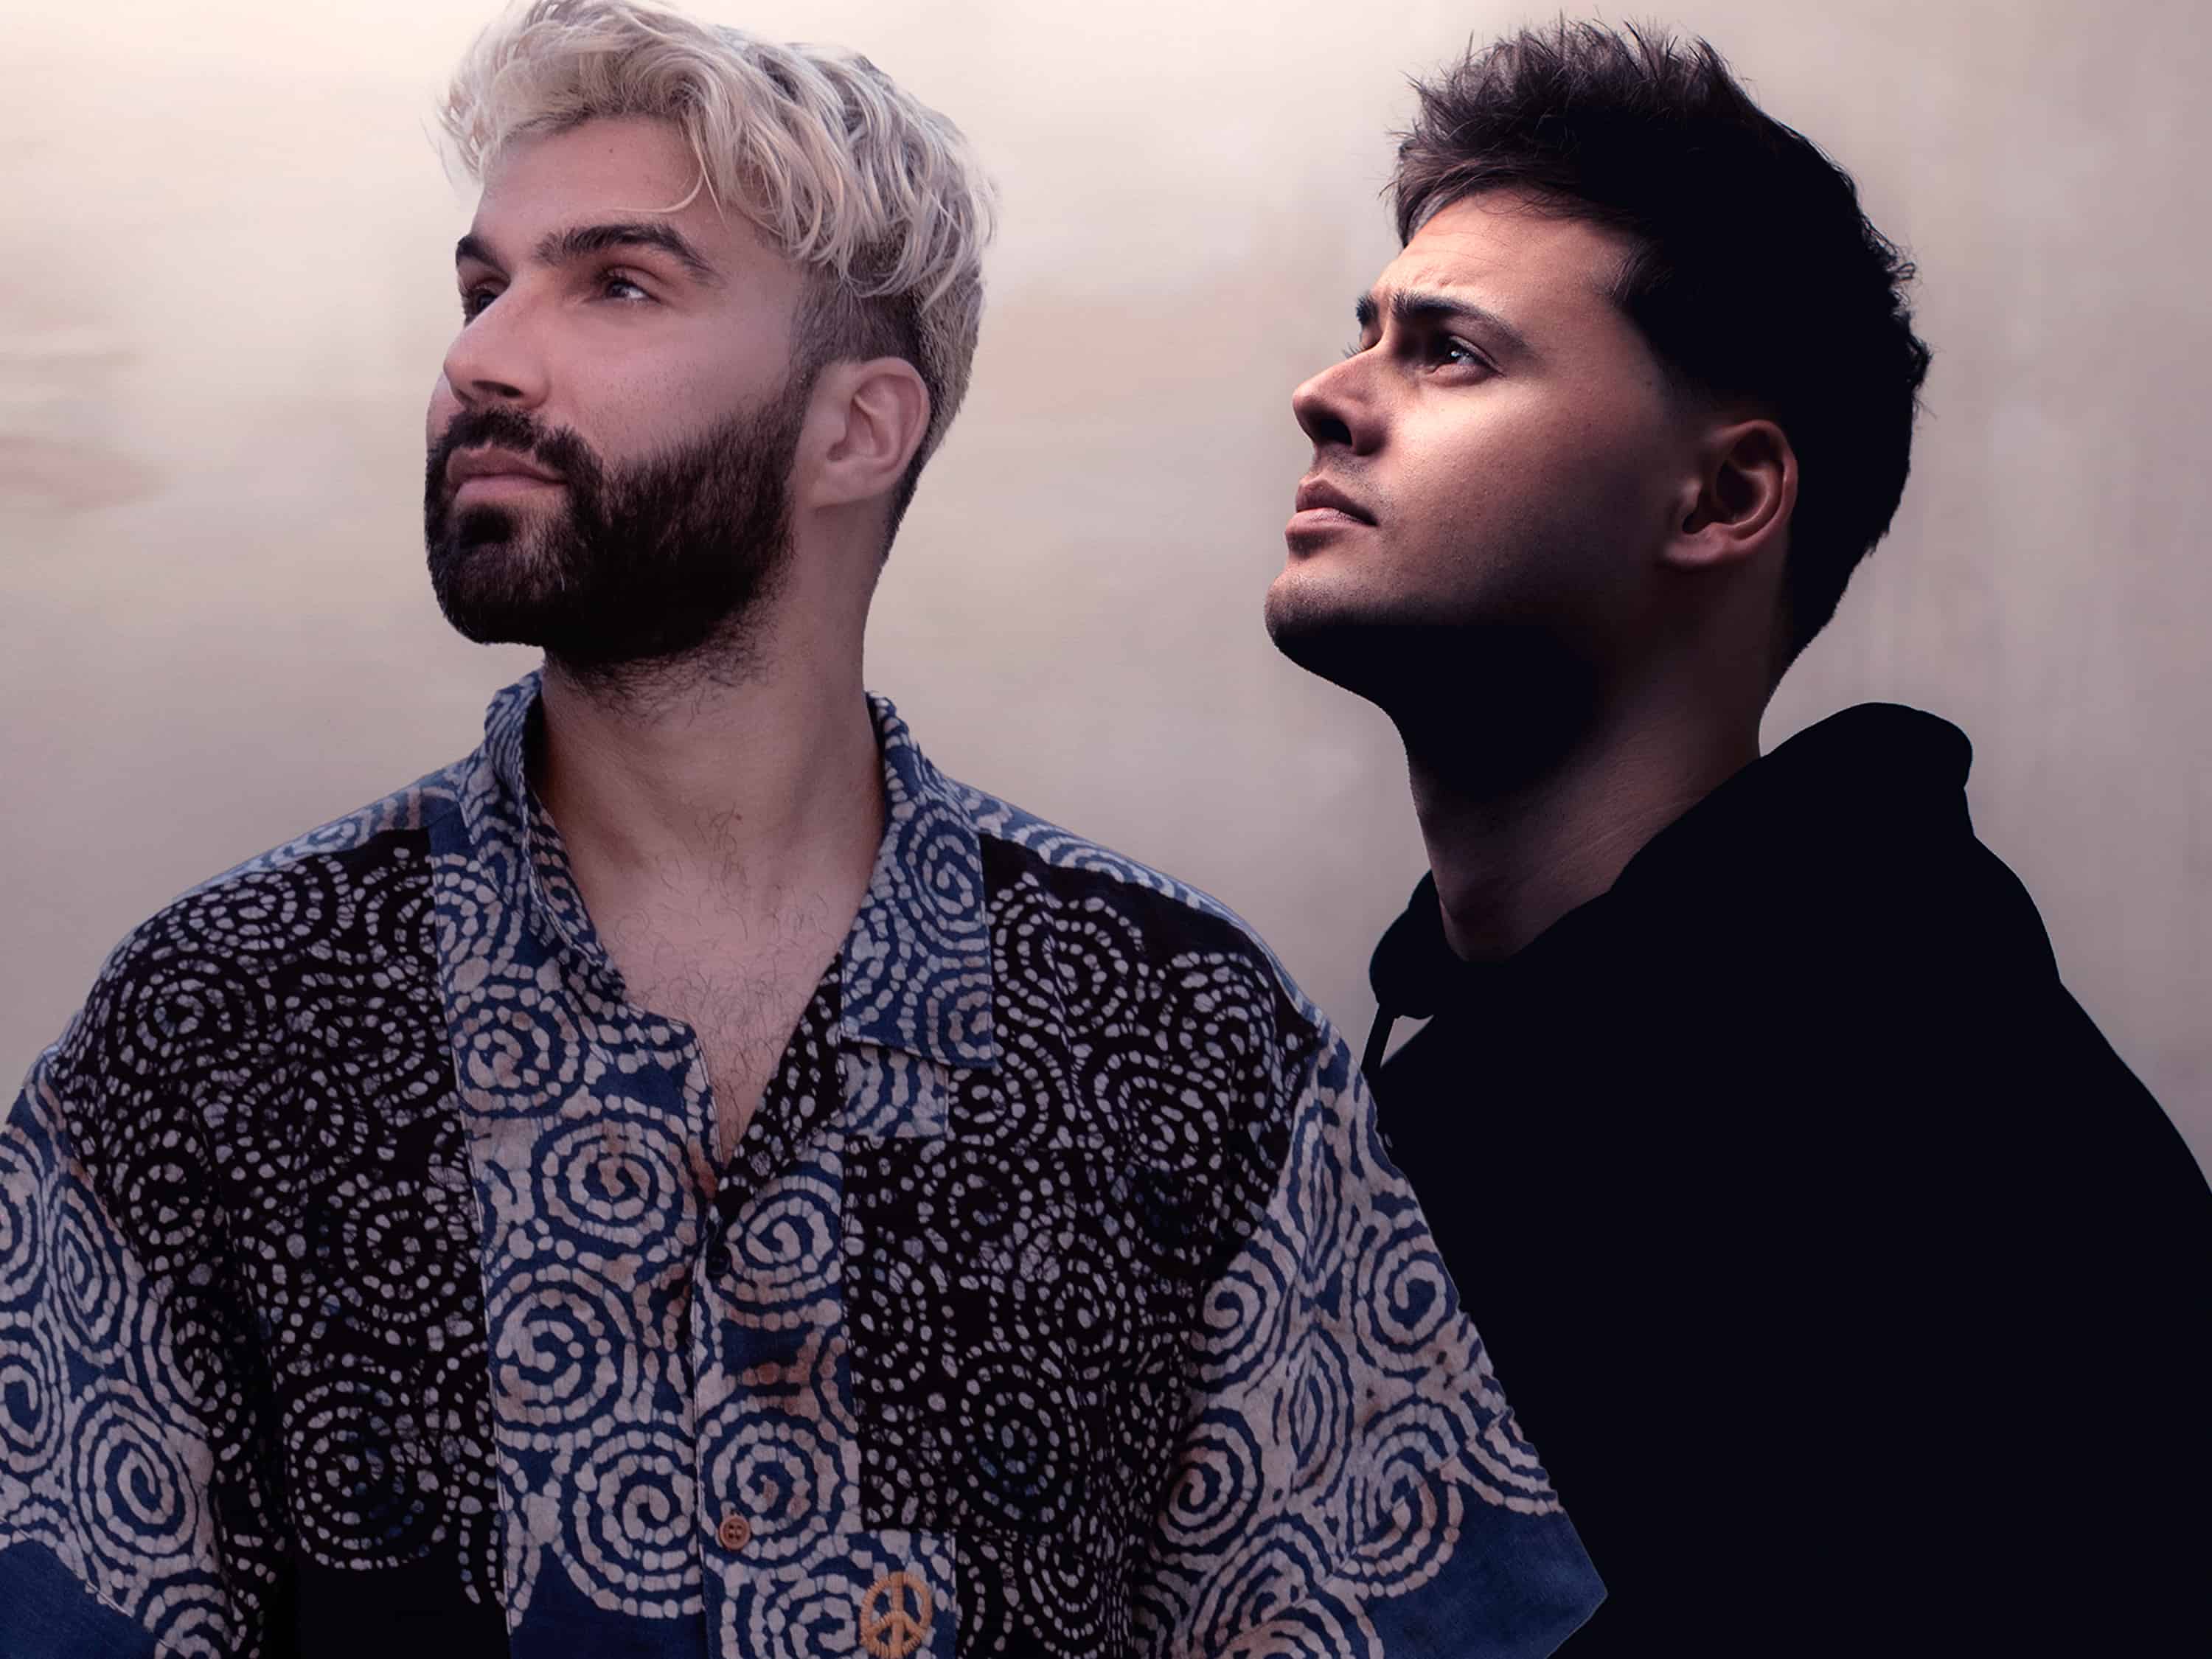 R3HAB & Mike Williams release spin off ‘Sing Your Lullaby’: Listen